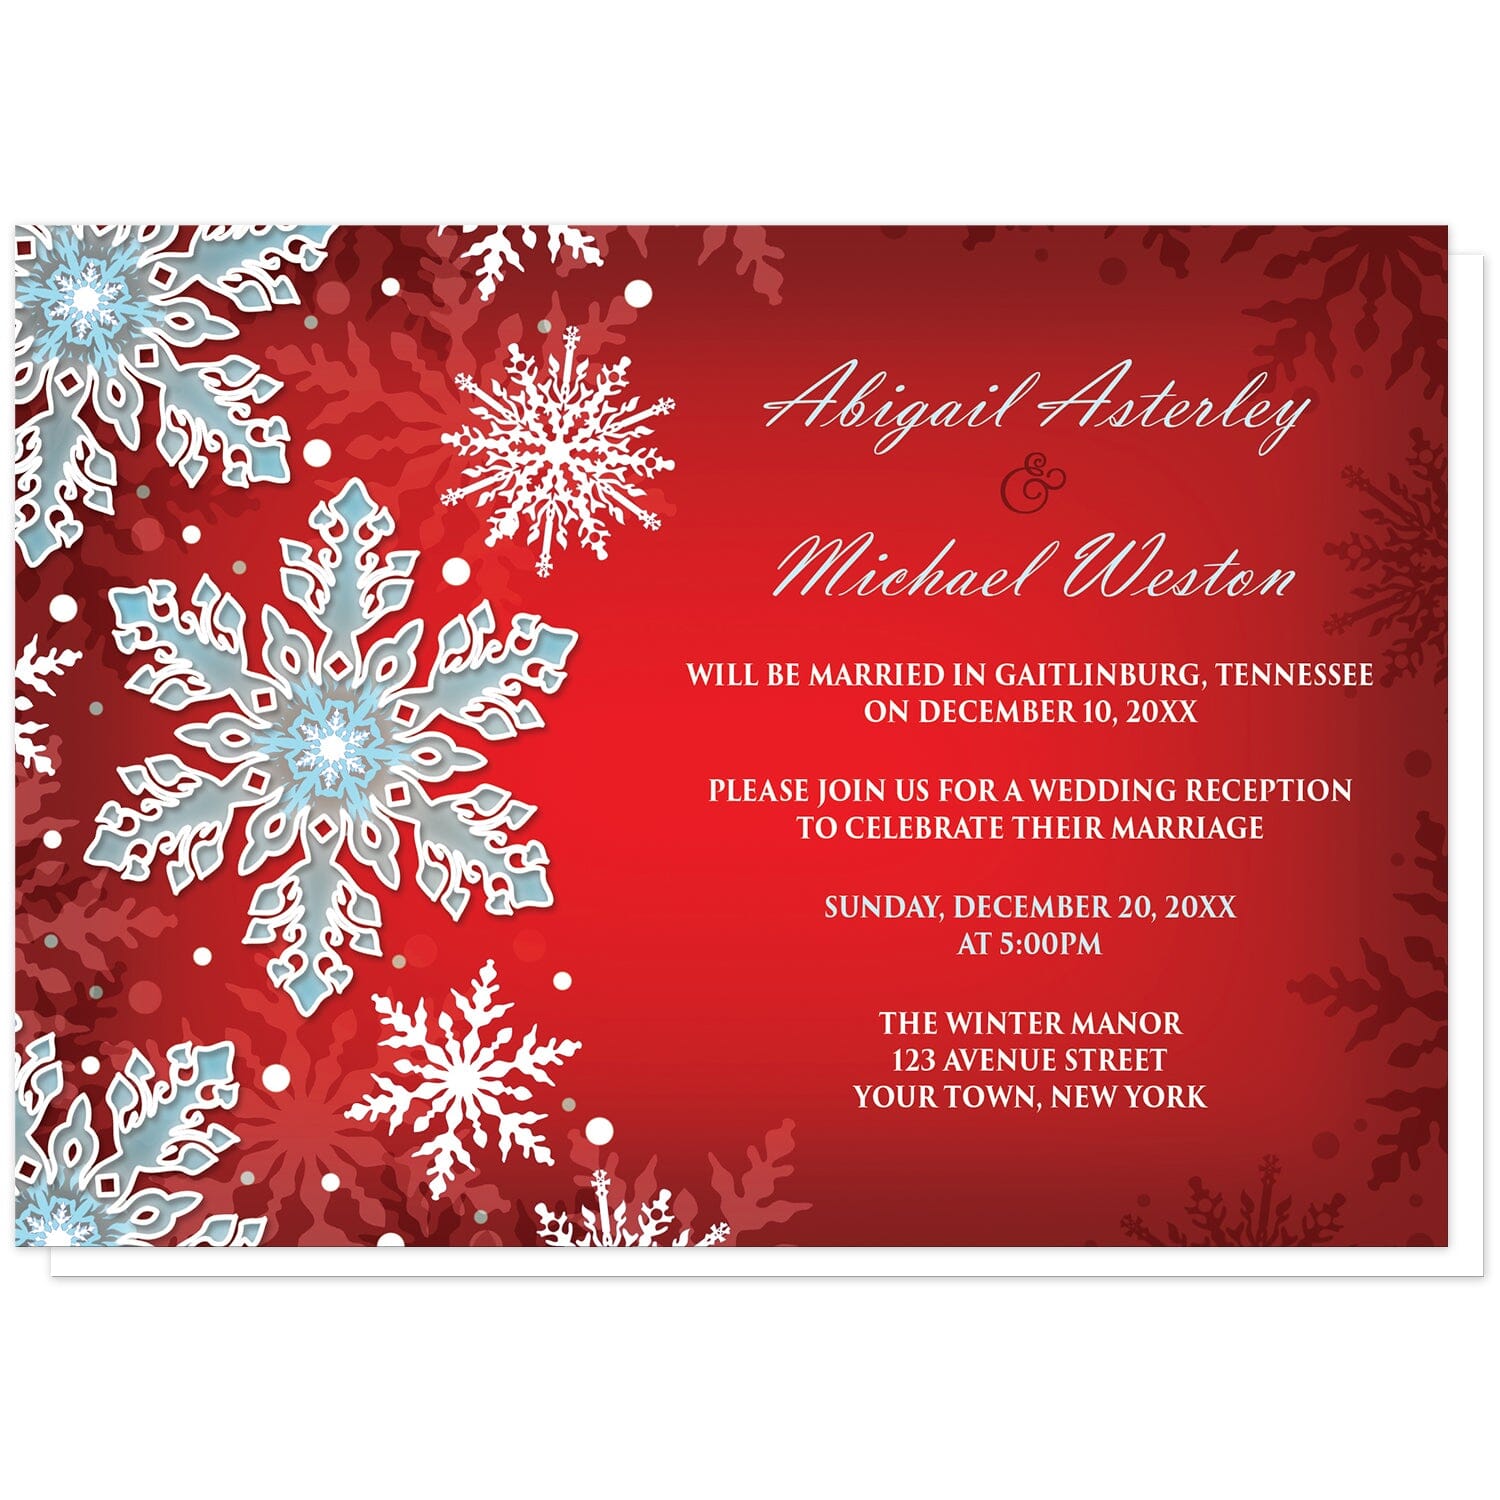 Royal Red White Blue Snowflake Reception Only Invitations at Artistically Invited. Royal red white blue snowflake reception only invitations with your personalized post-wedding reception details custom printed in white and light blue over a royal red gradient background covered in ornate white and blue snowflakes along the left side.